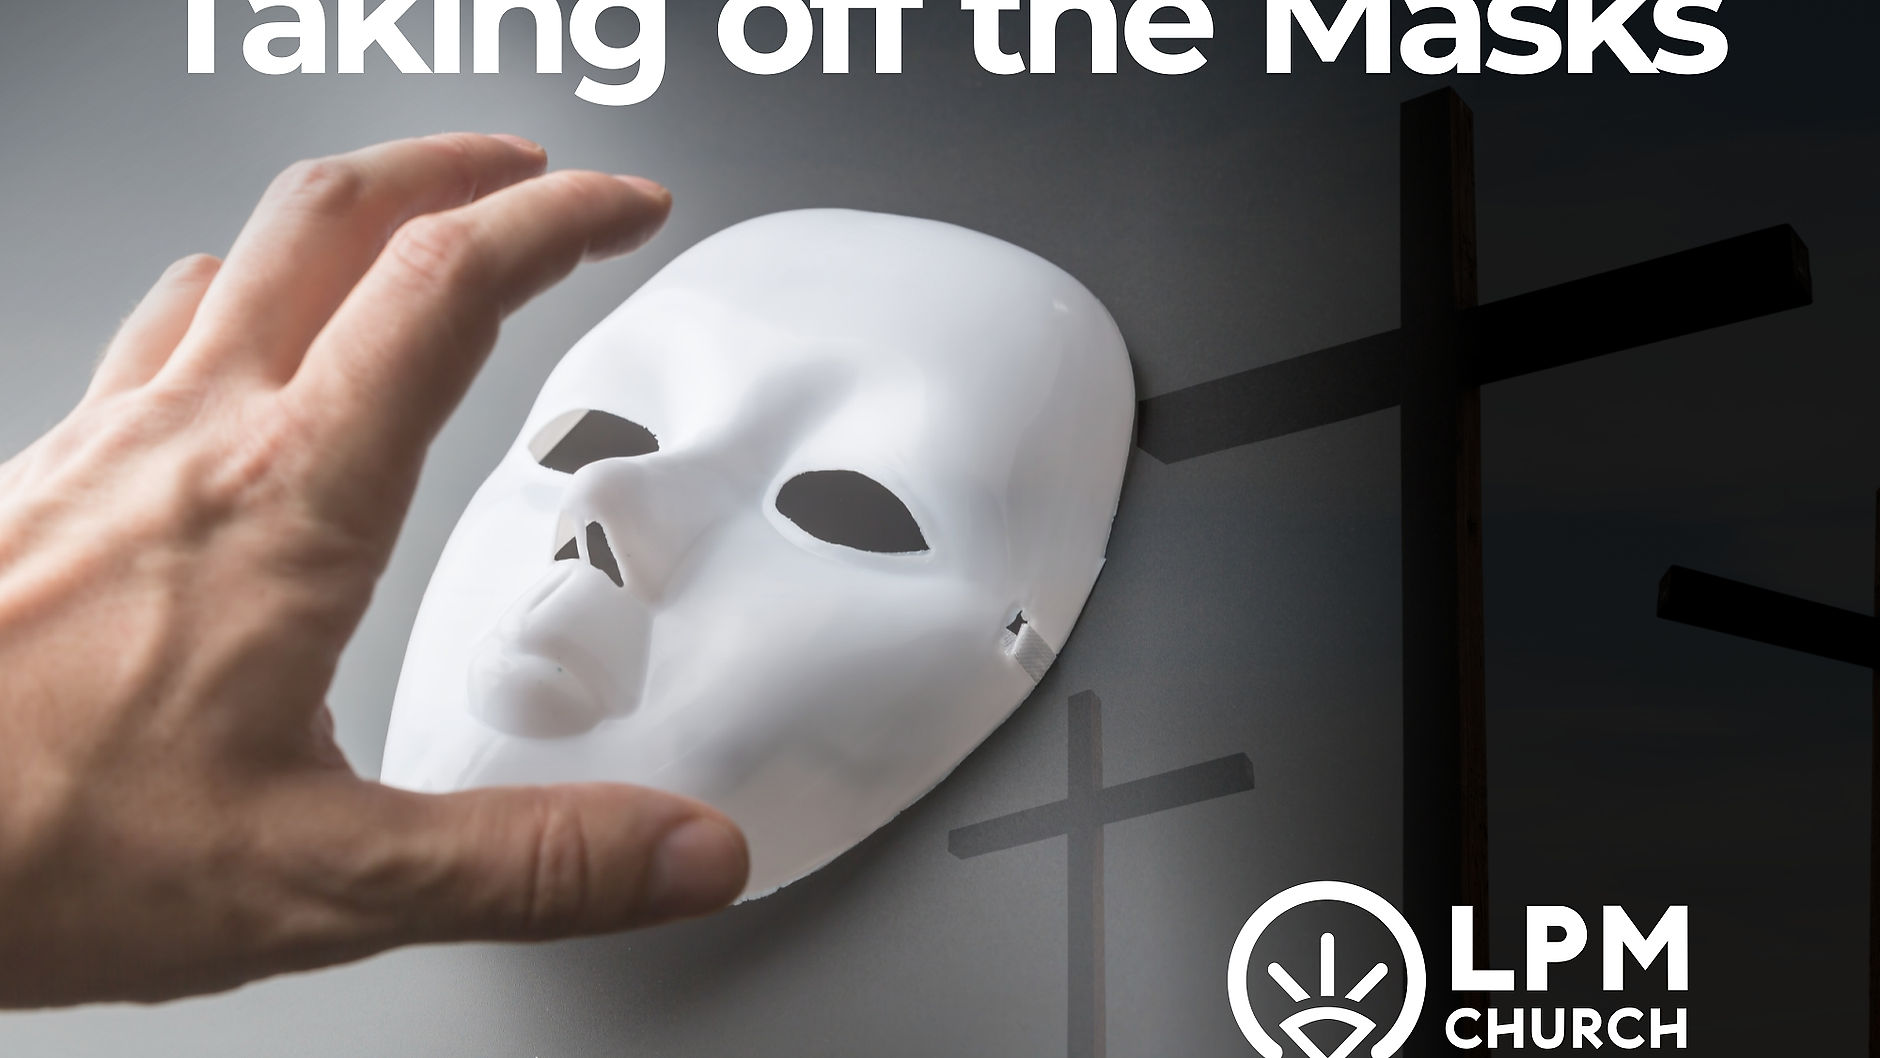 TAKING OFF THE MASKS